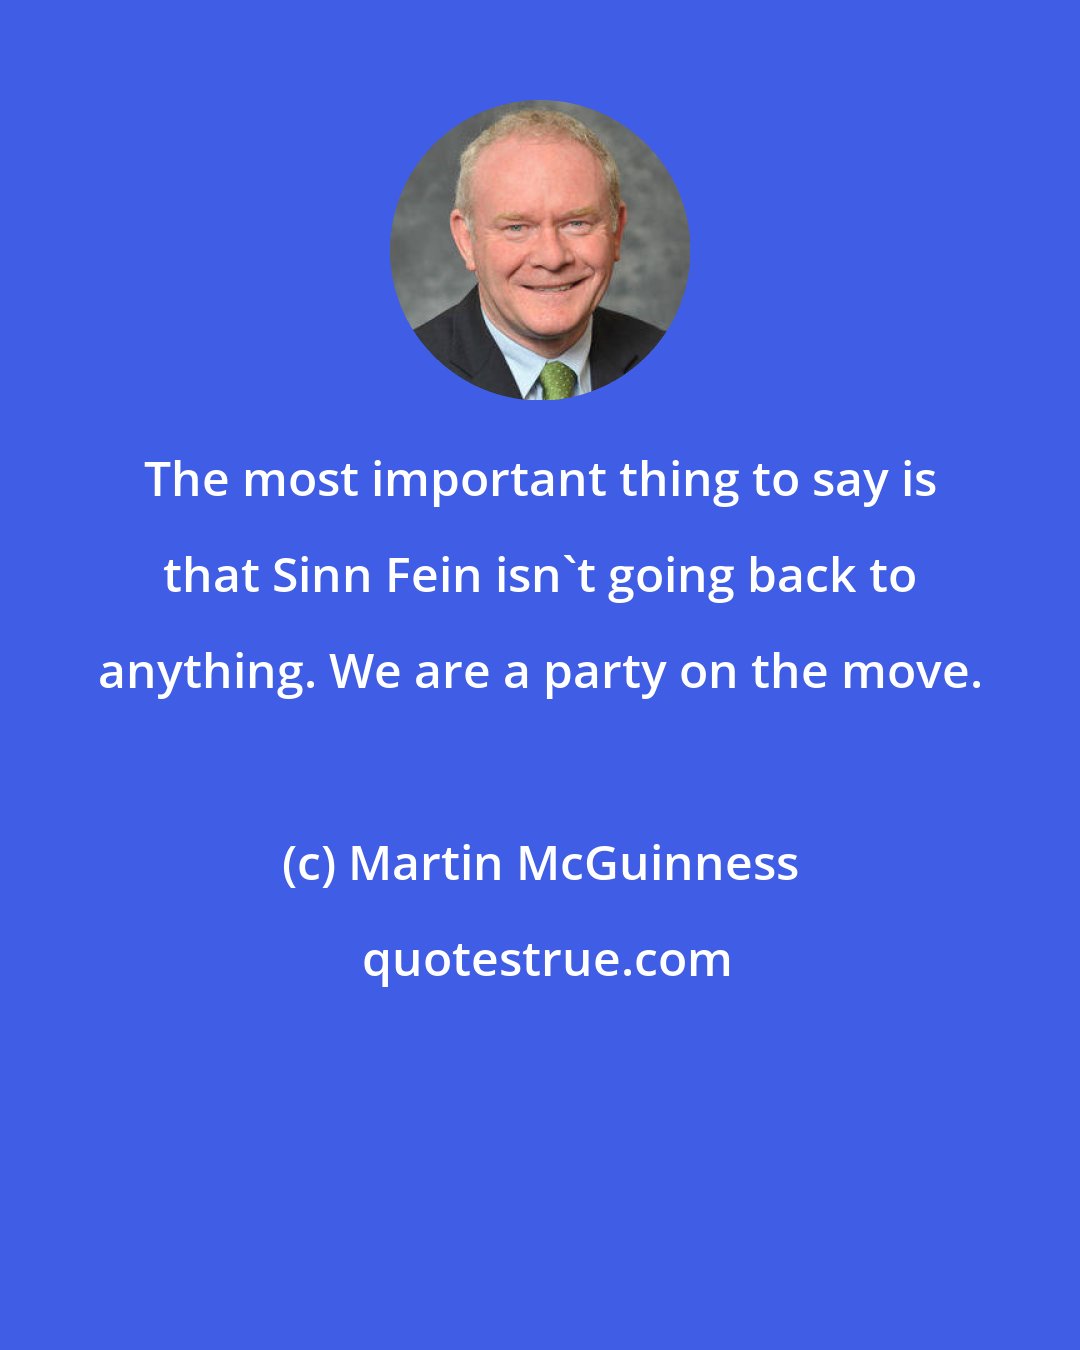 Martin McGuinness: The most important thing to say is that Sinn Fein isn't going back to anything. We are a party on the move.